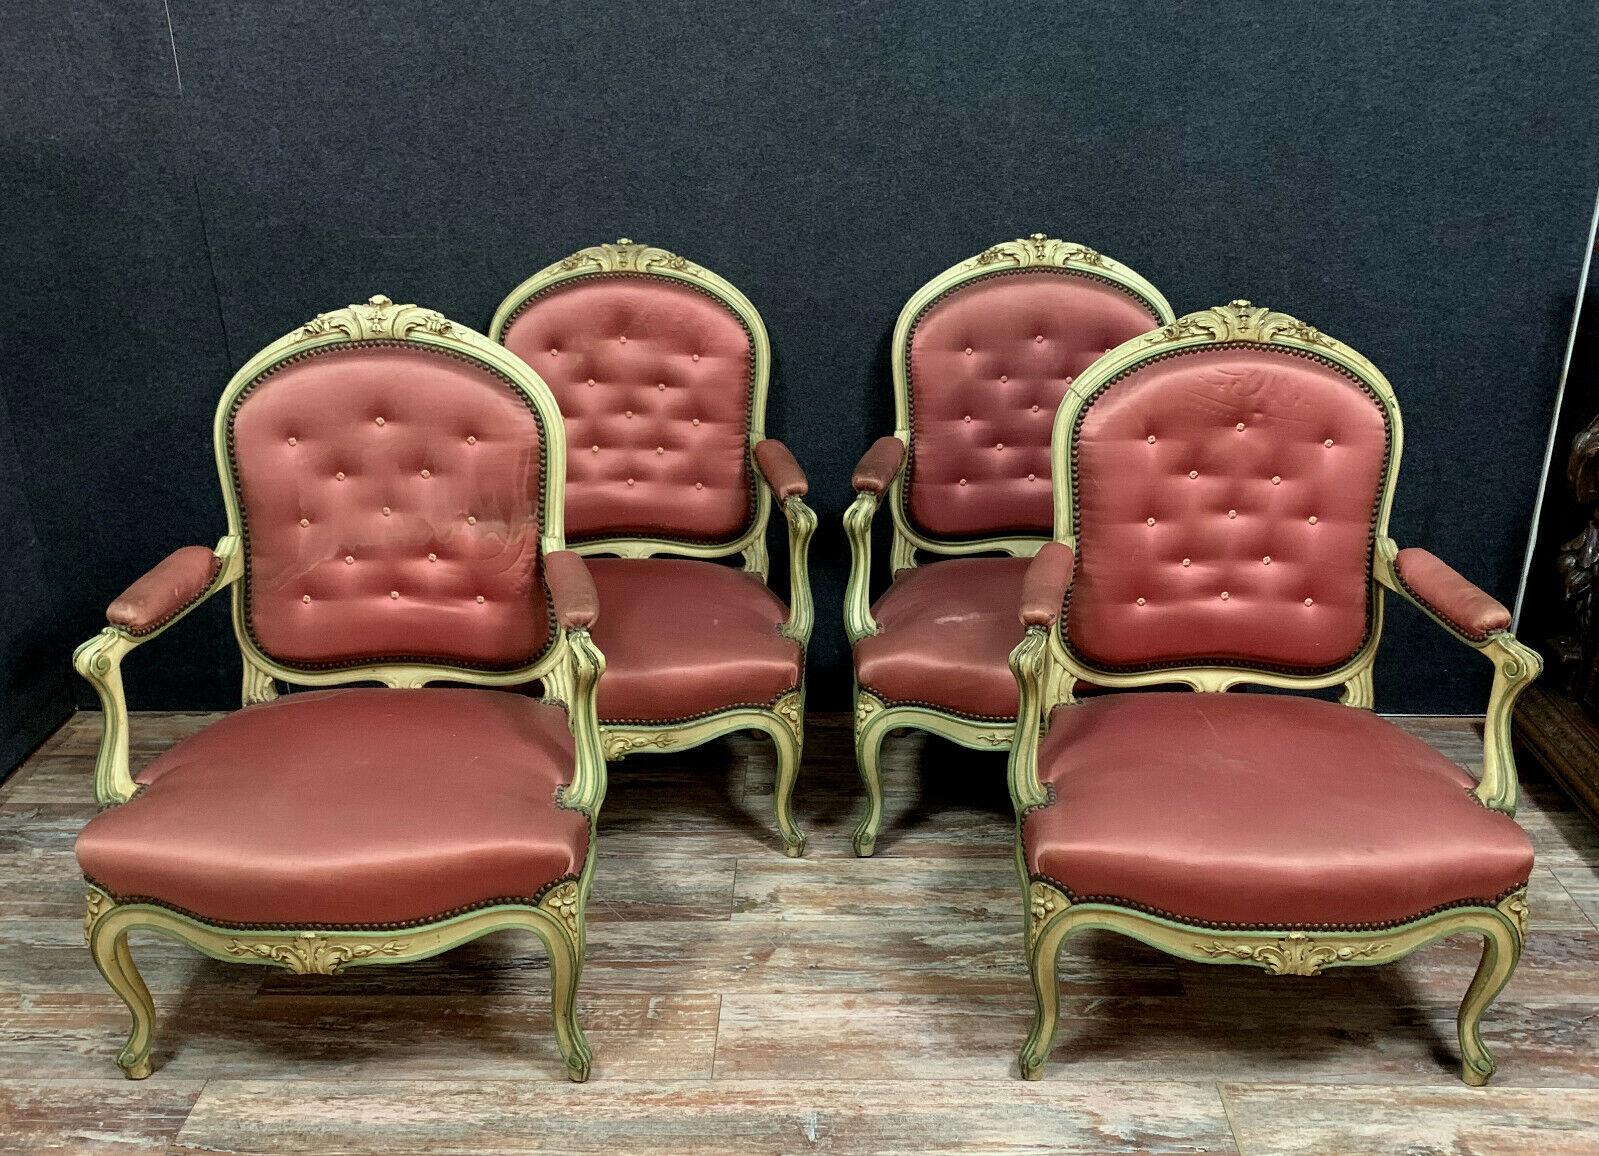 Mid-19th Century Louis XV Lacquered Wood Salon Furniture Set with 4 Armchairs and 2 Chairs -1X01